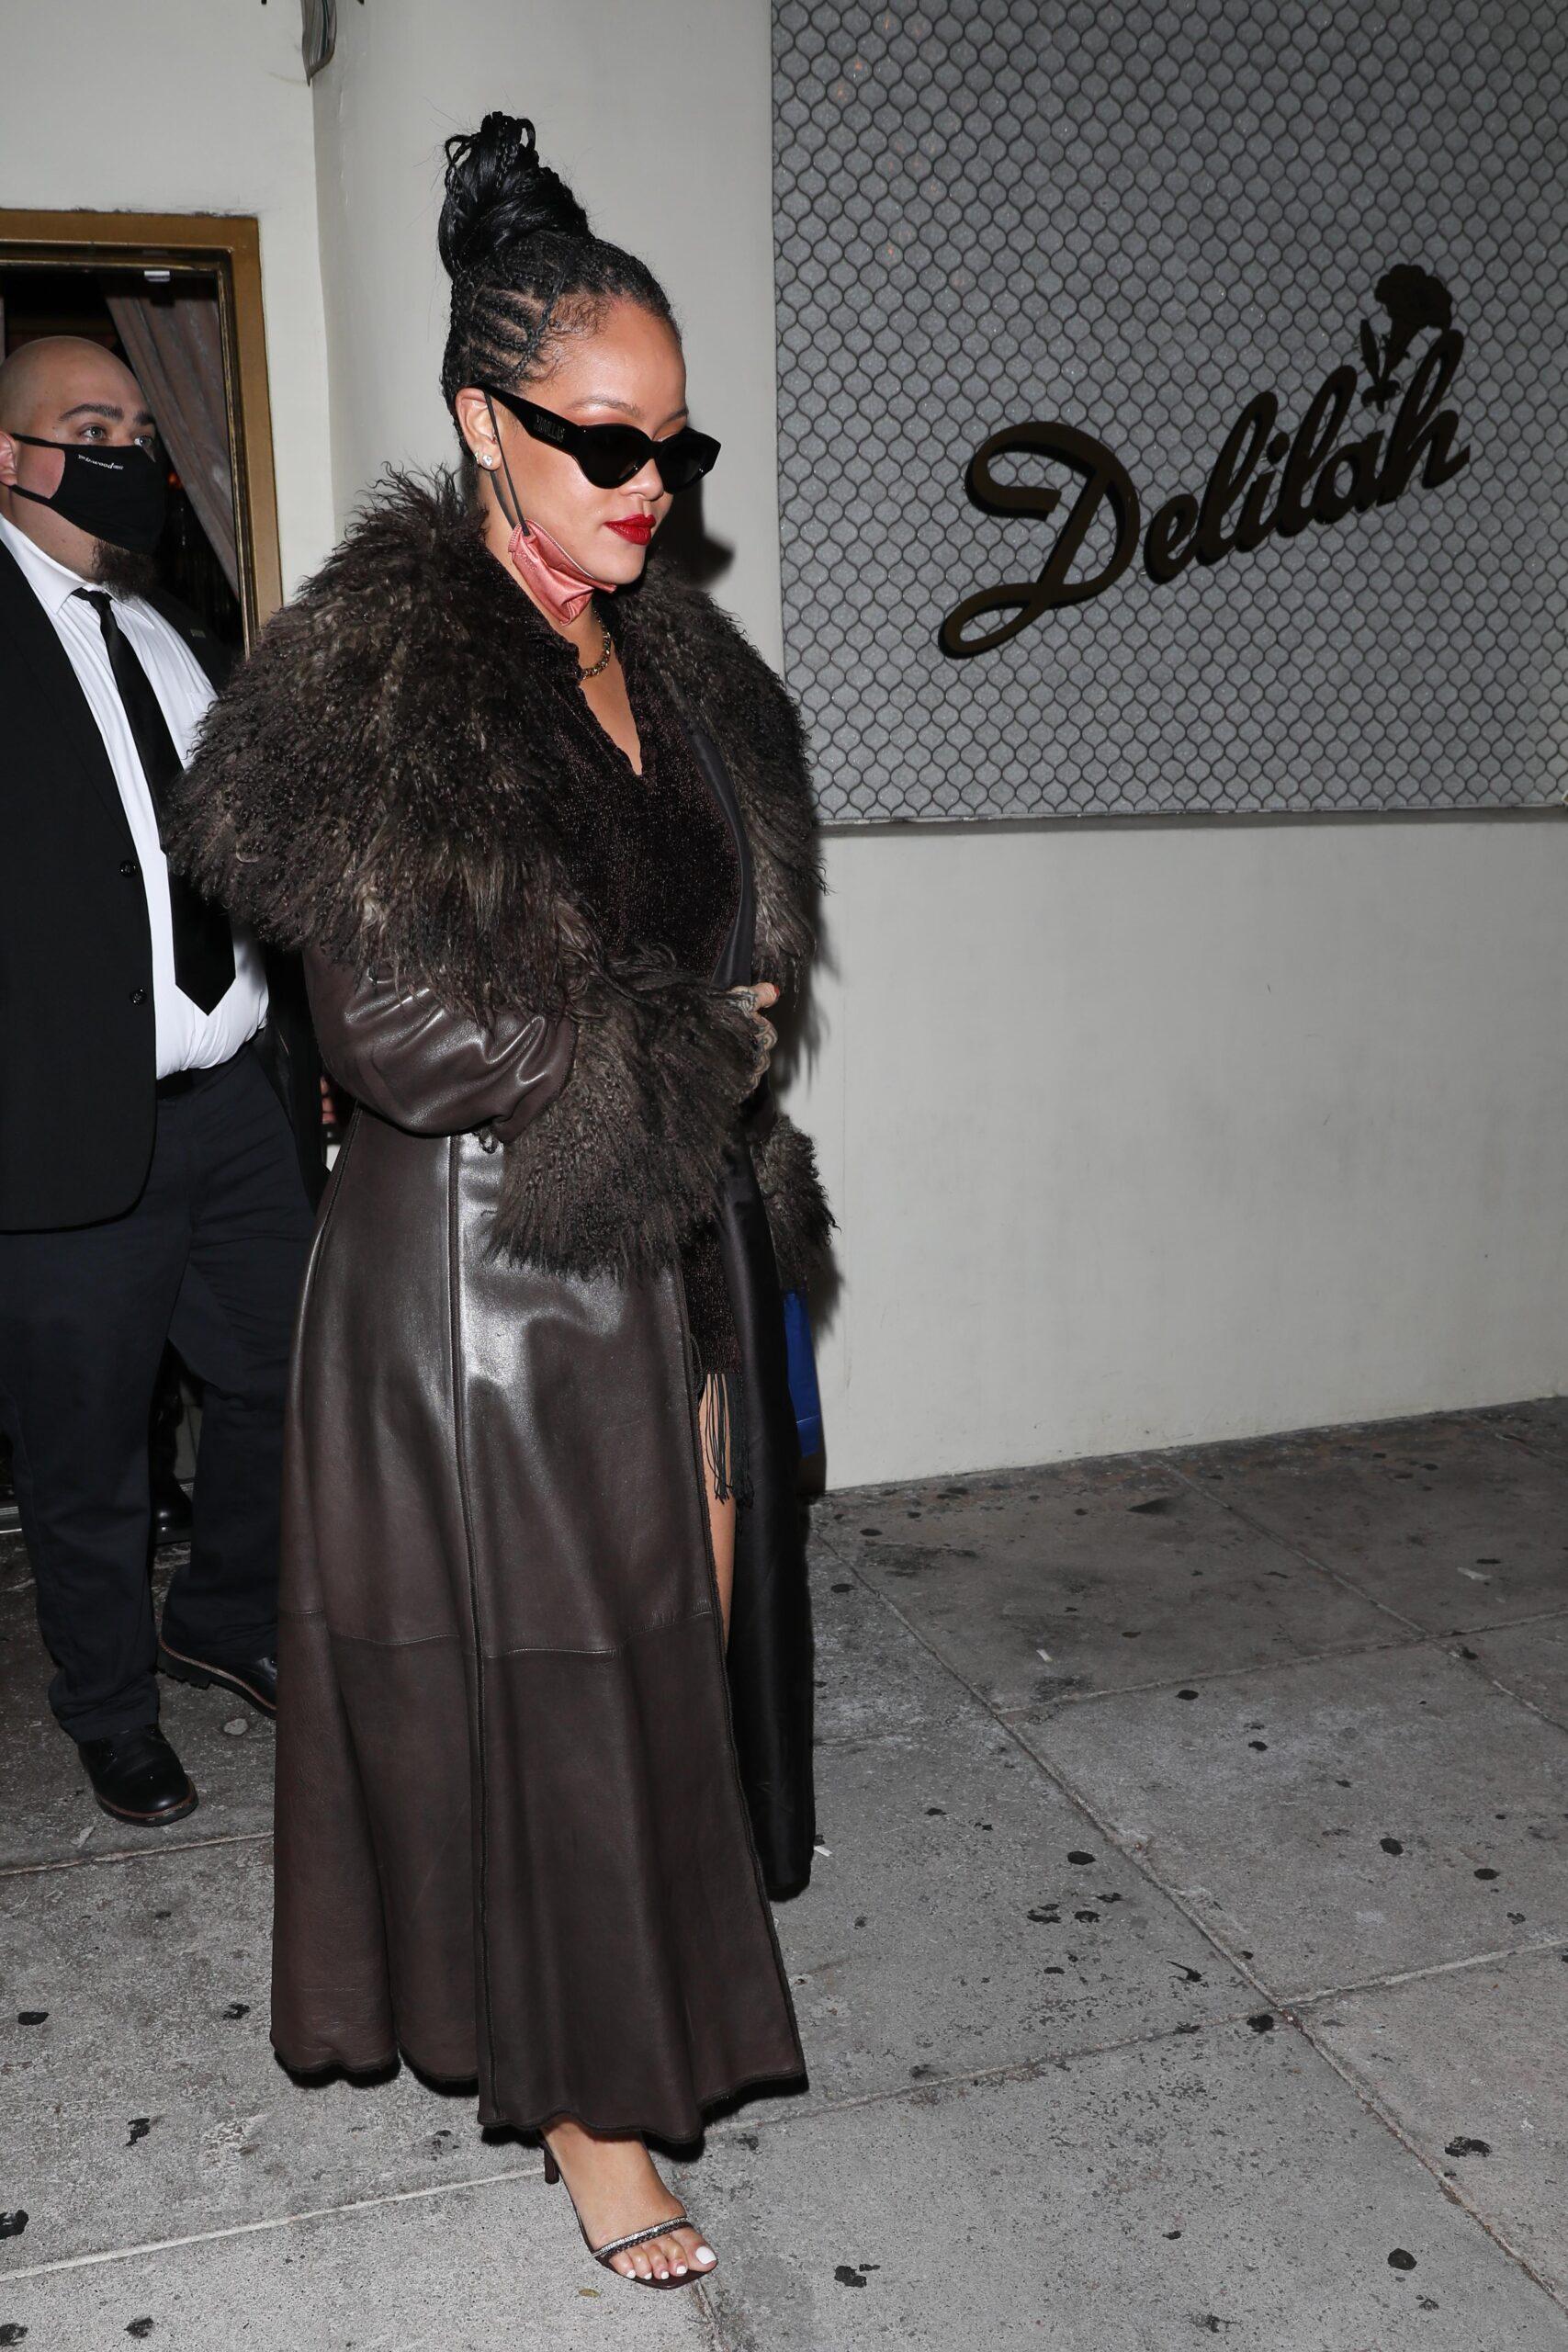 Asap Rocky amp Rihanna are both spotted leaving together at Delilah